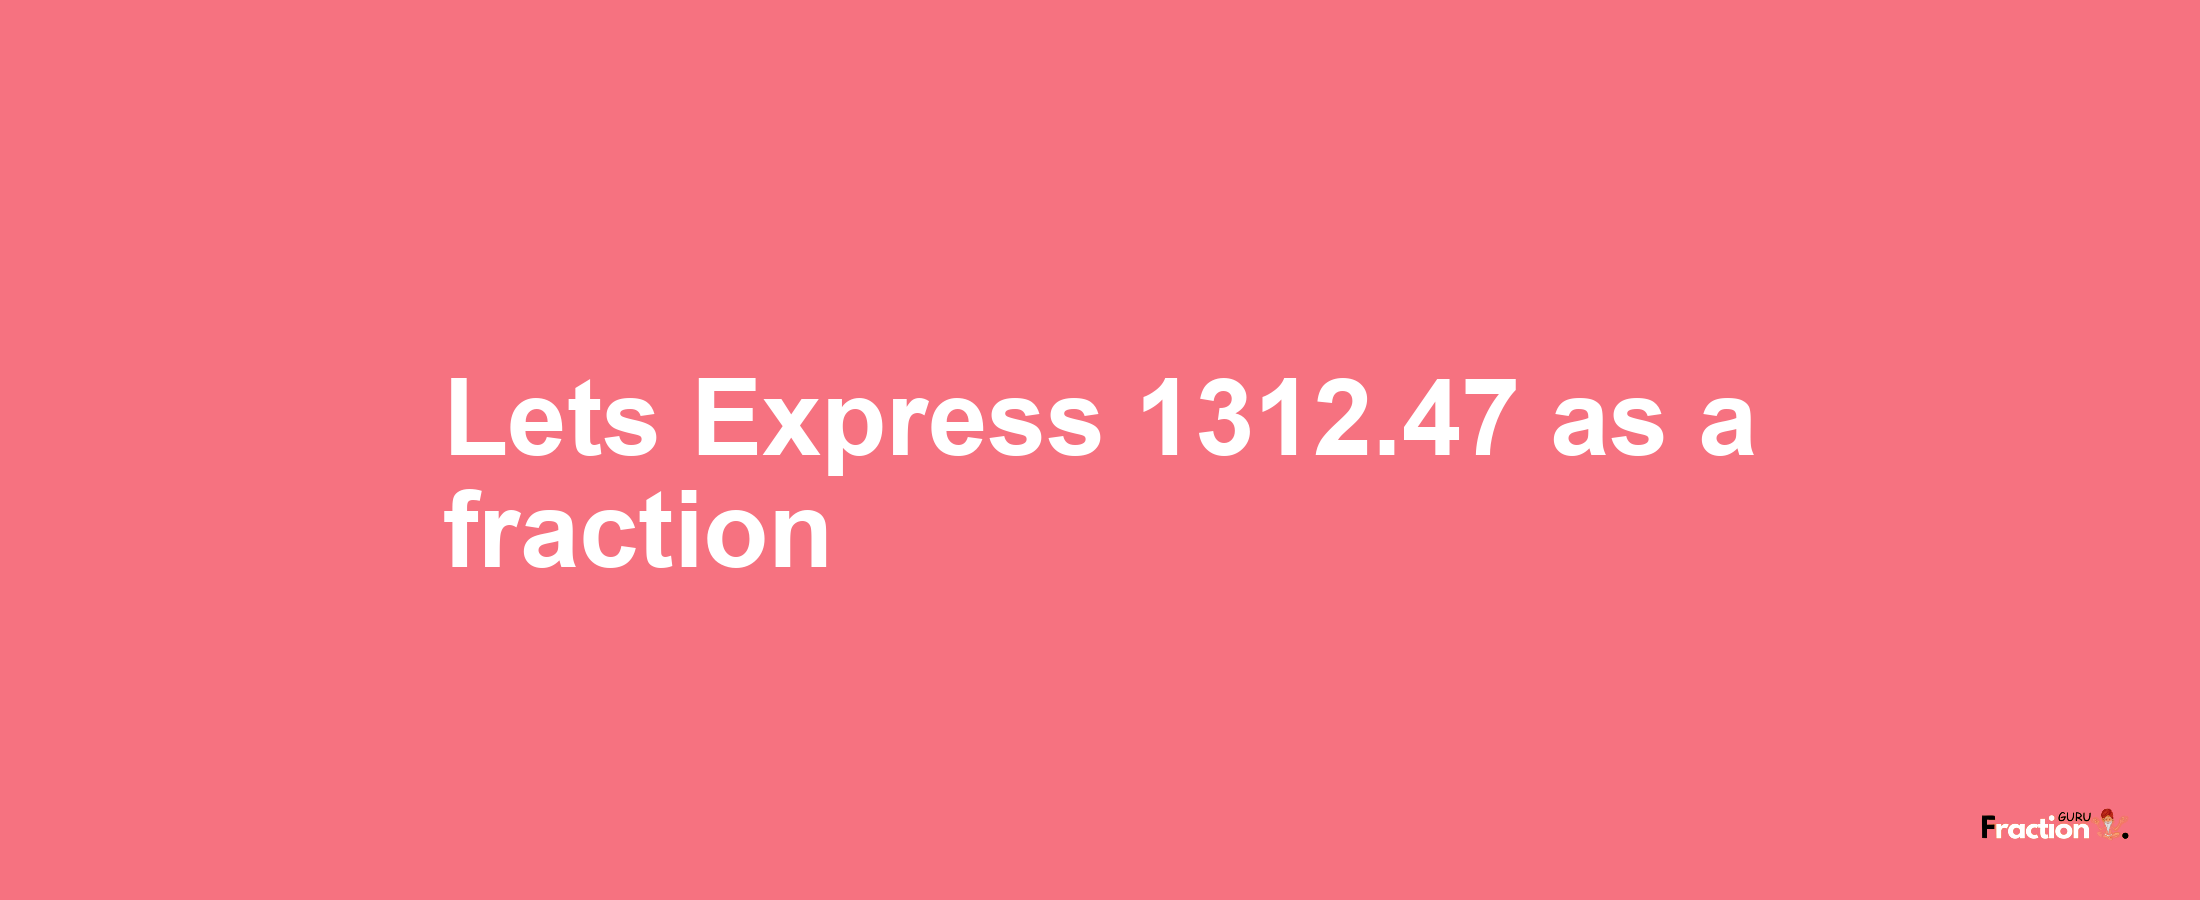 Lets Express 1312.47 as afraction